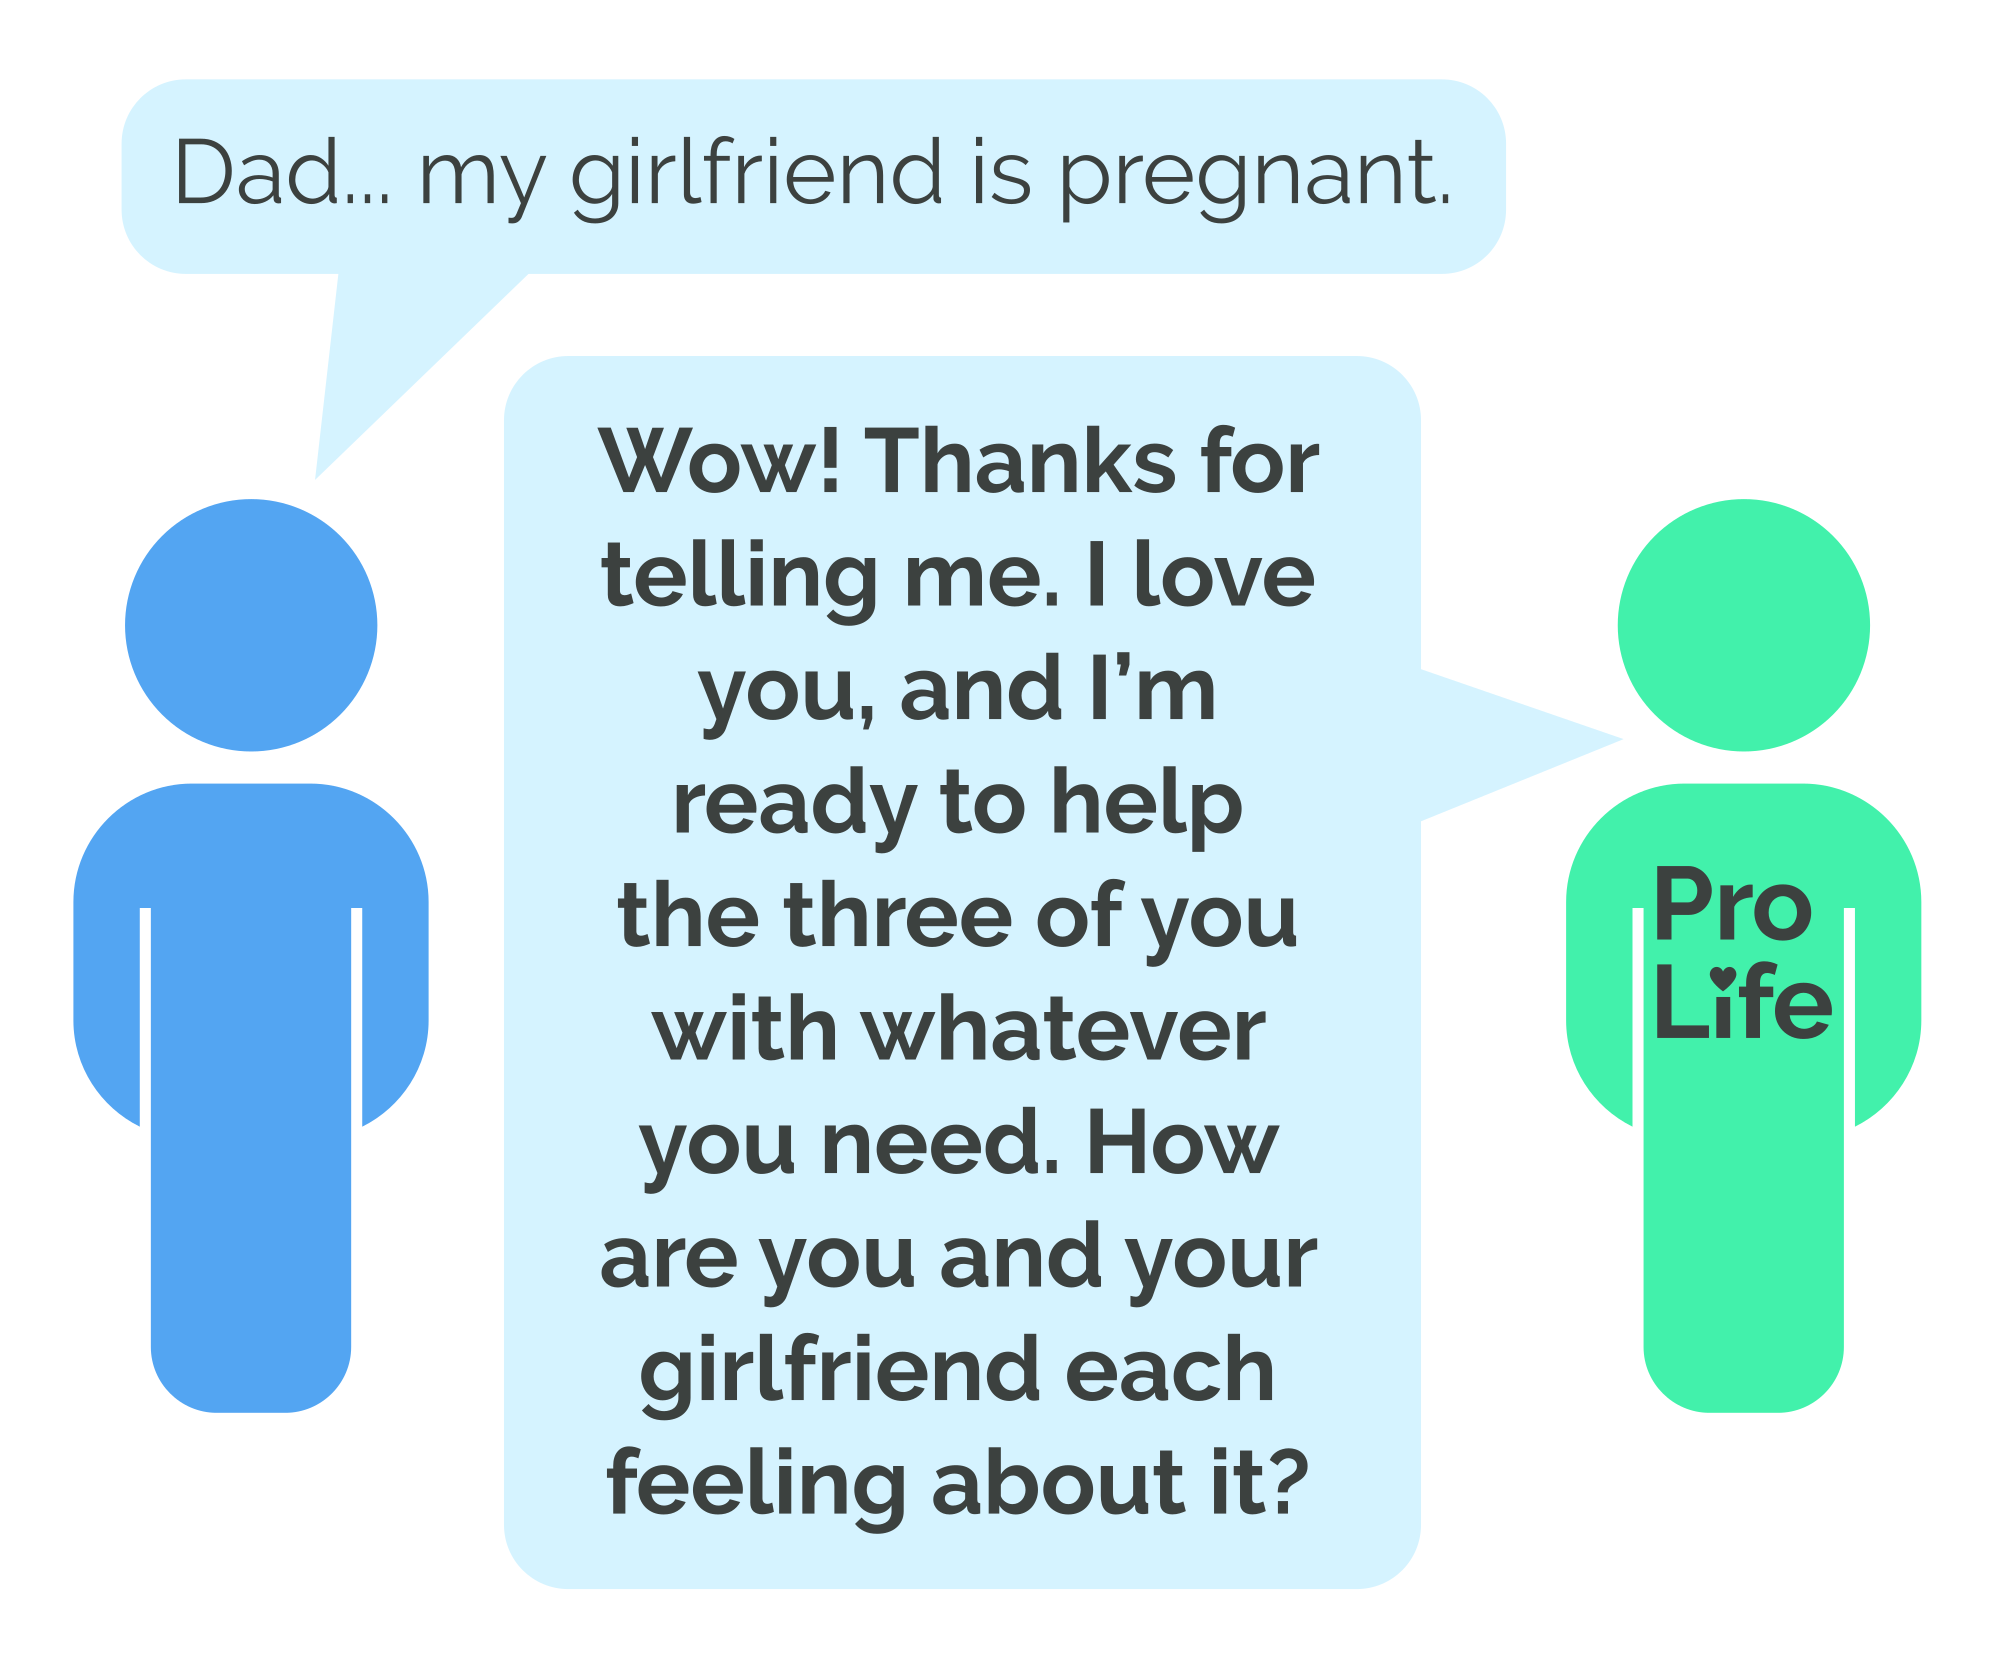 Person 1: Dad... my girlfriend is pregnant. Person 2 (our hero): Wow! Thanks for telling me. I love you, and I’m ready to help the three of you with whatever you need. How are you and your girlfriend each feeling about it?